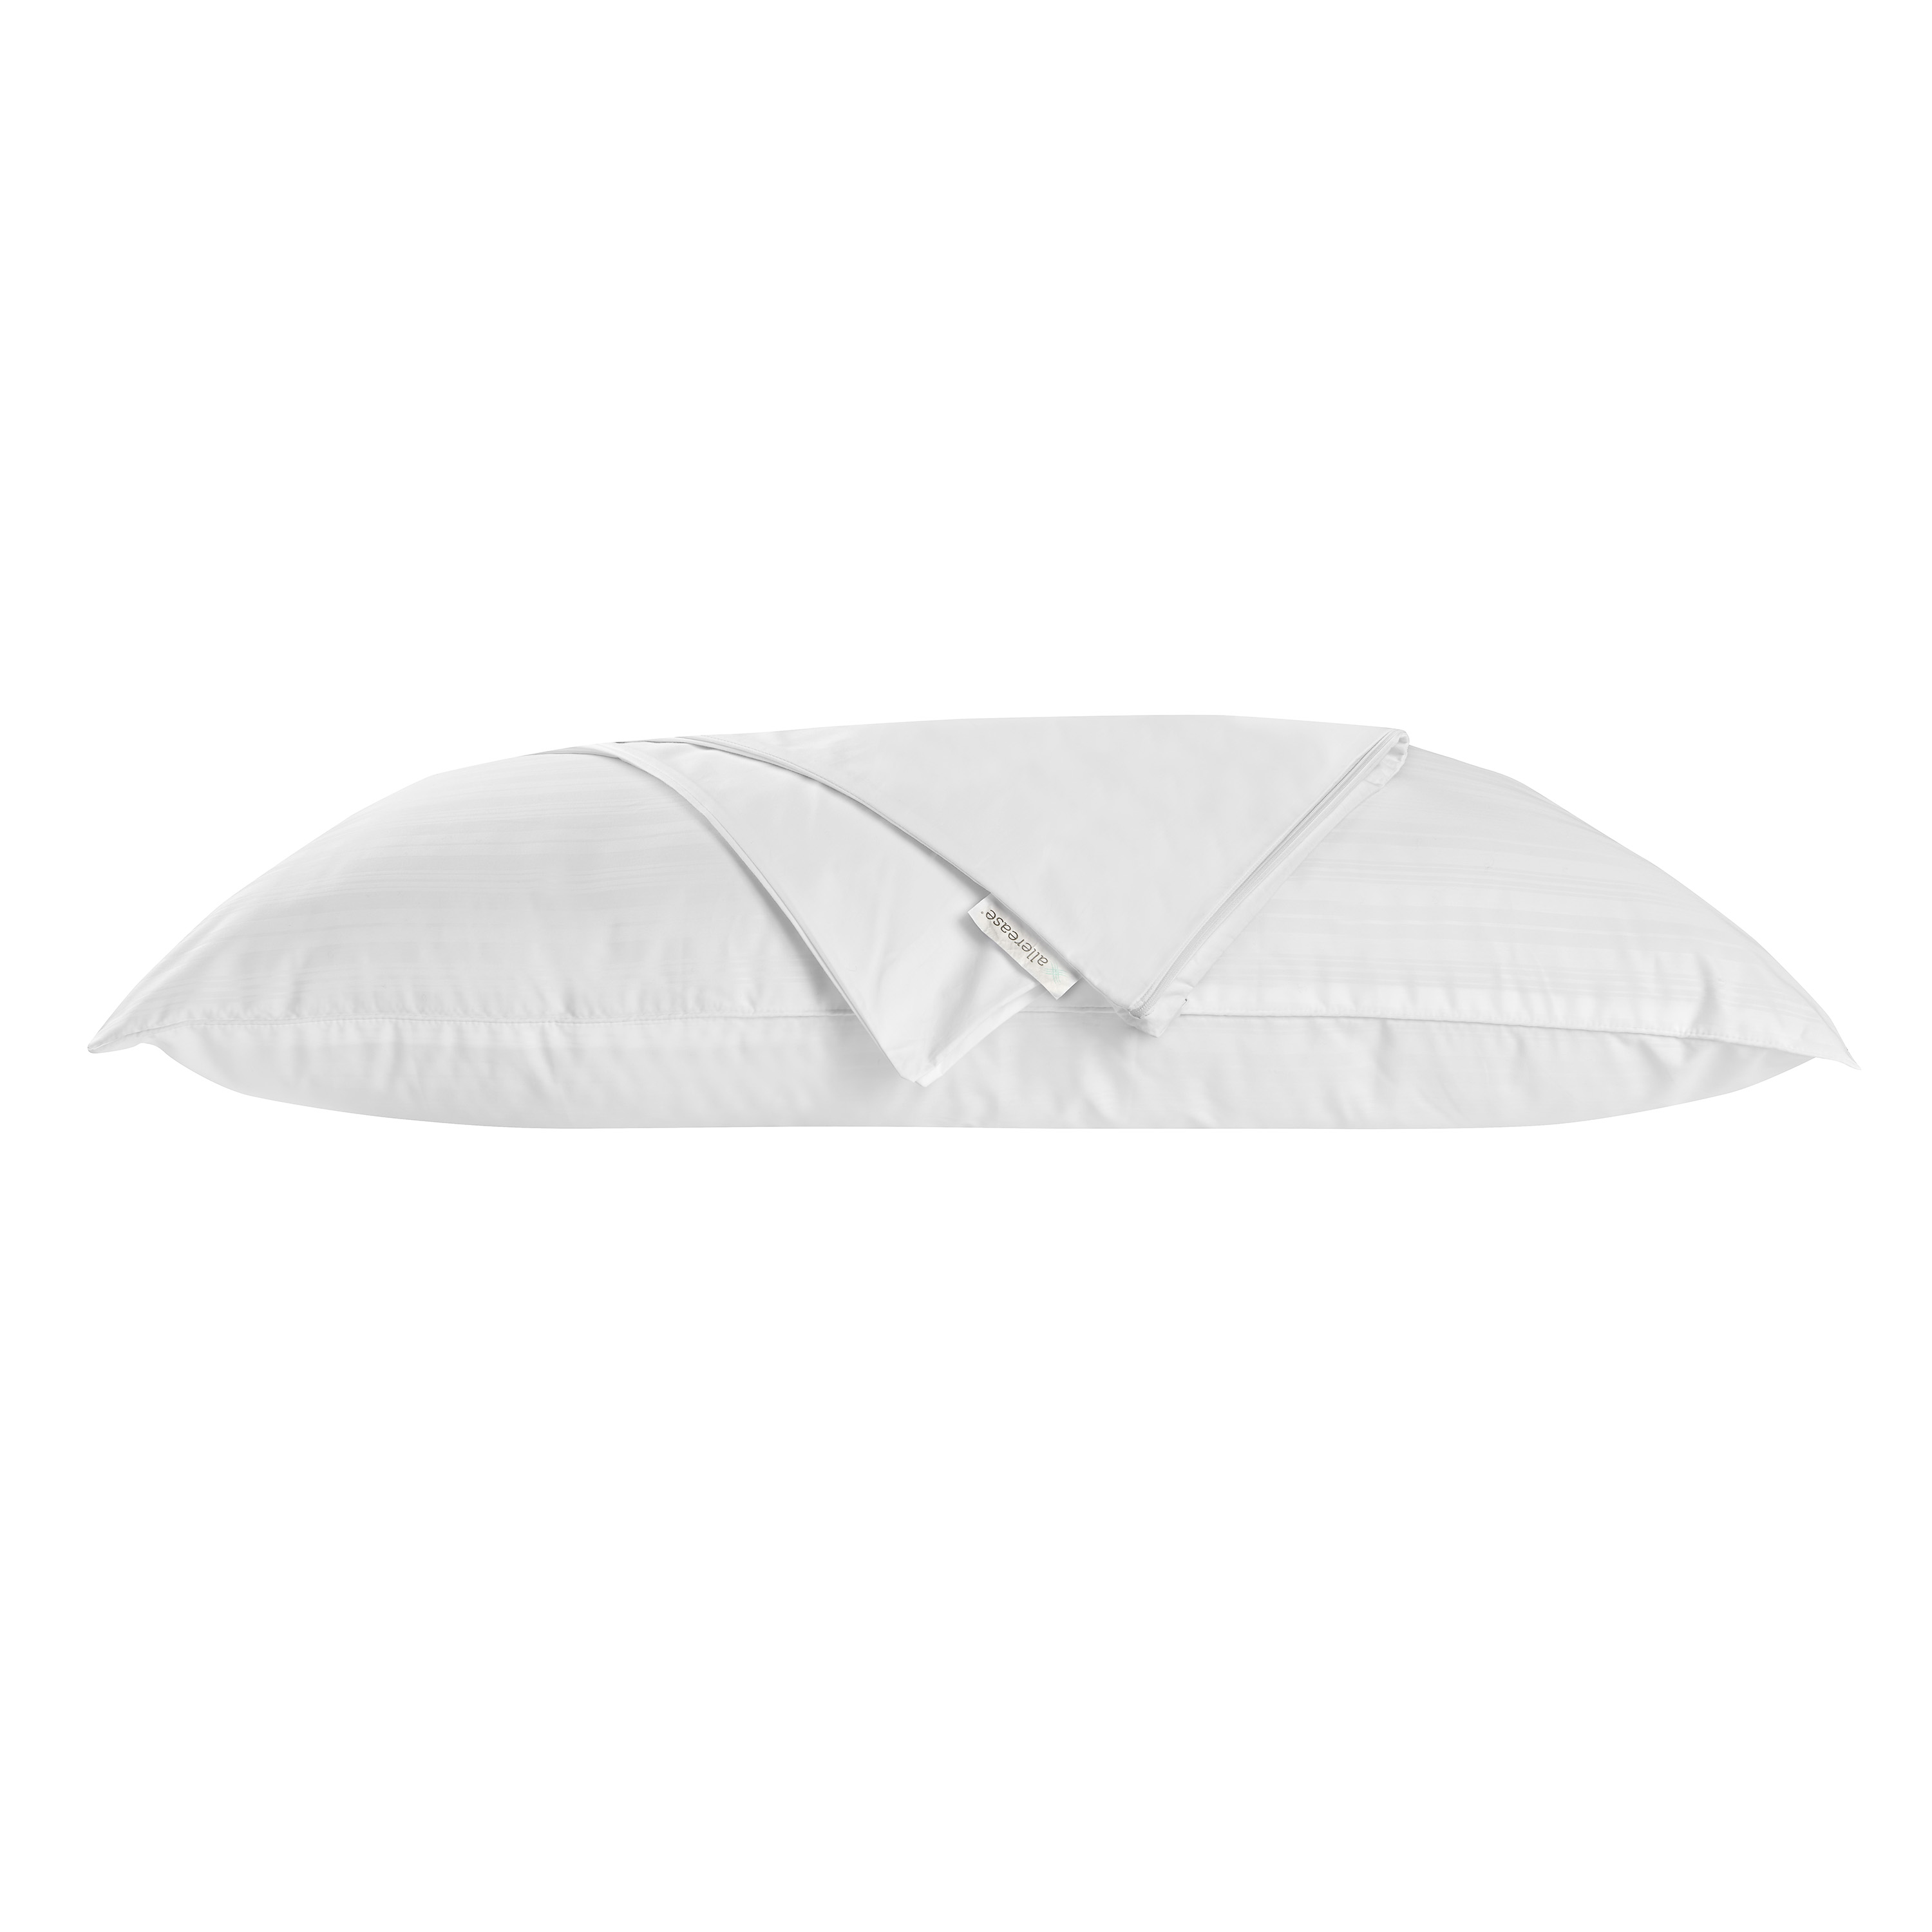 Allerease Cotton Zippered Pillow Protector, Standard, 2 Pack - image 3 of 8